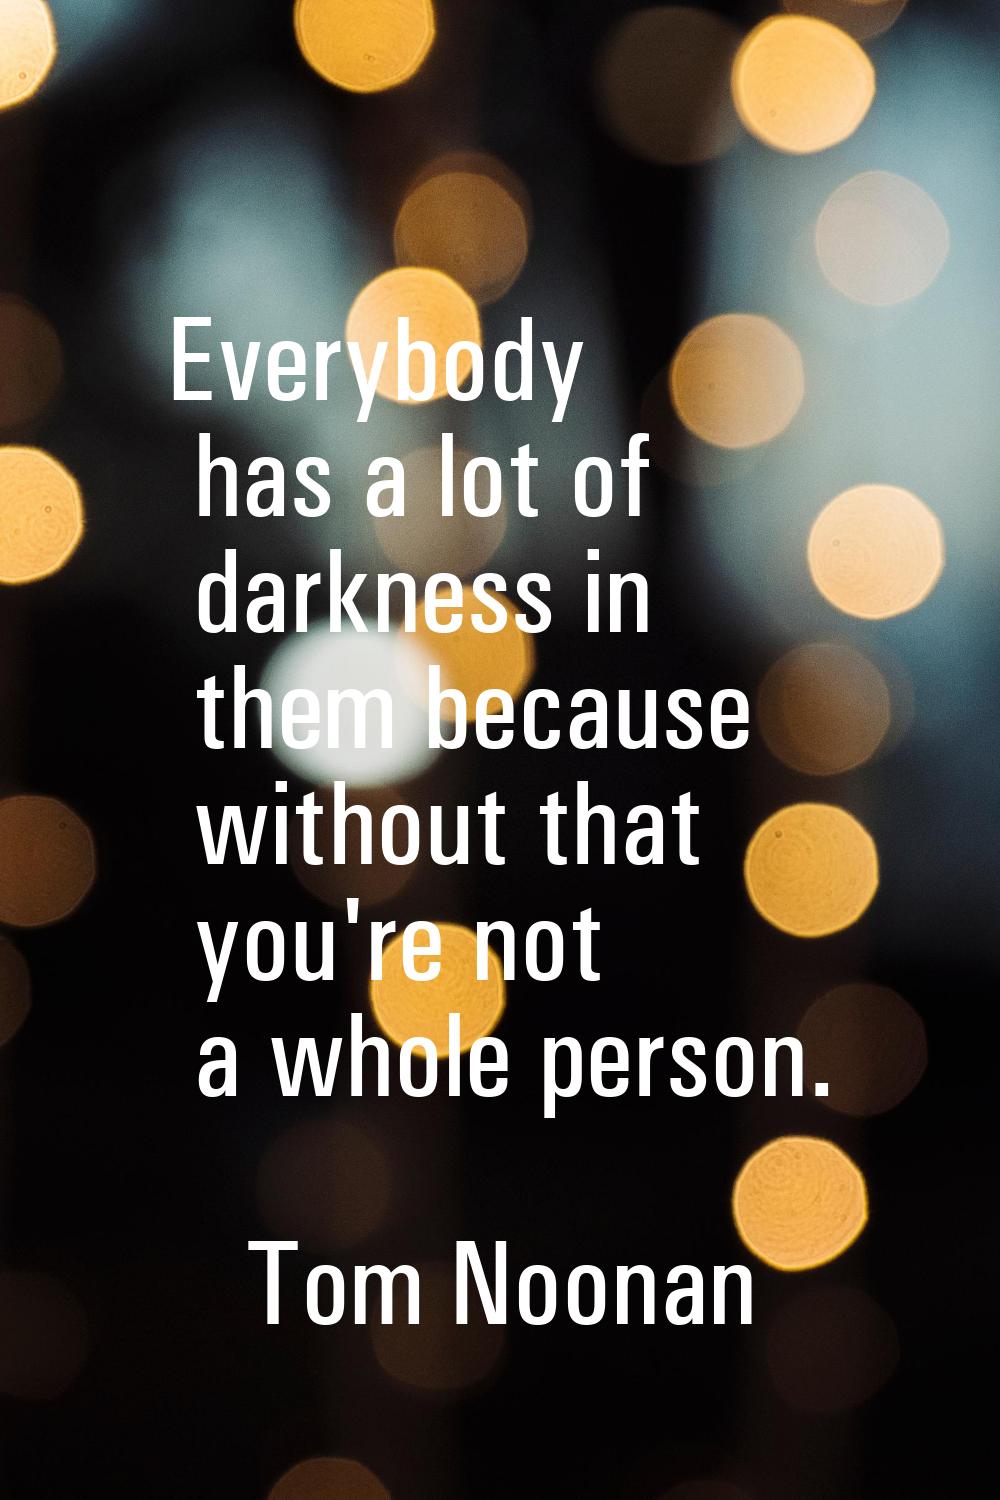 Everybody has a lot of darkness in them because without that you're not a whole person.